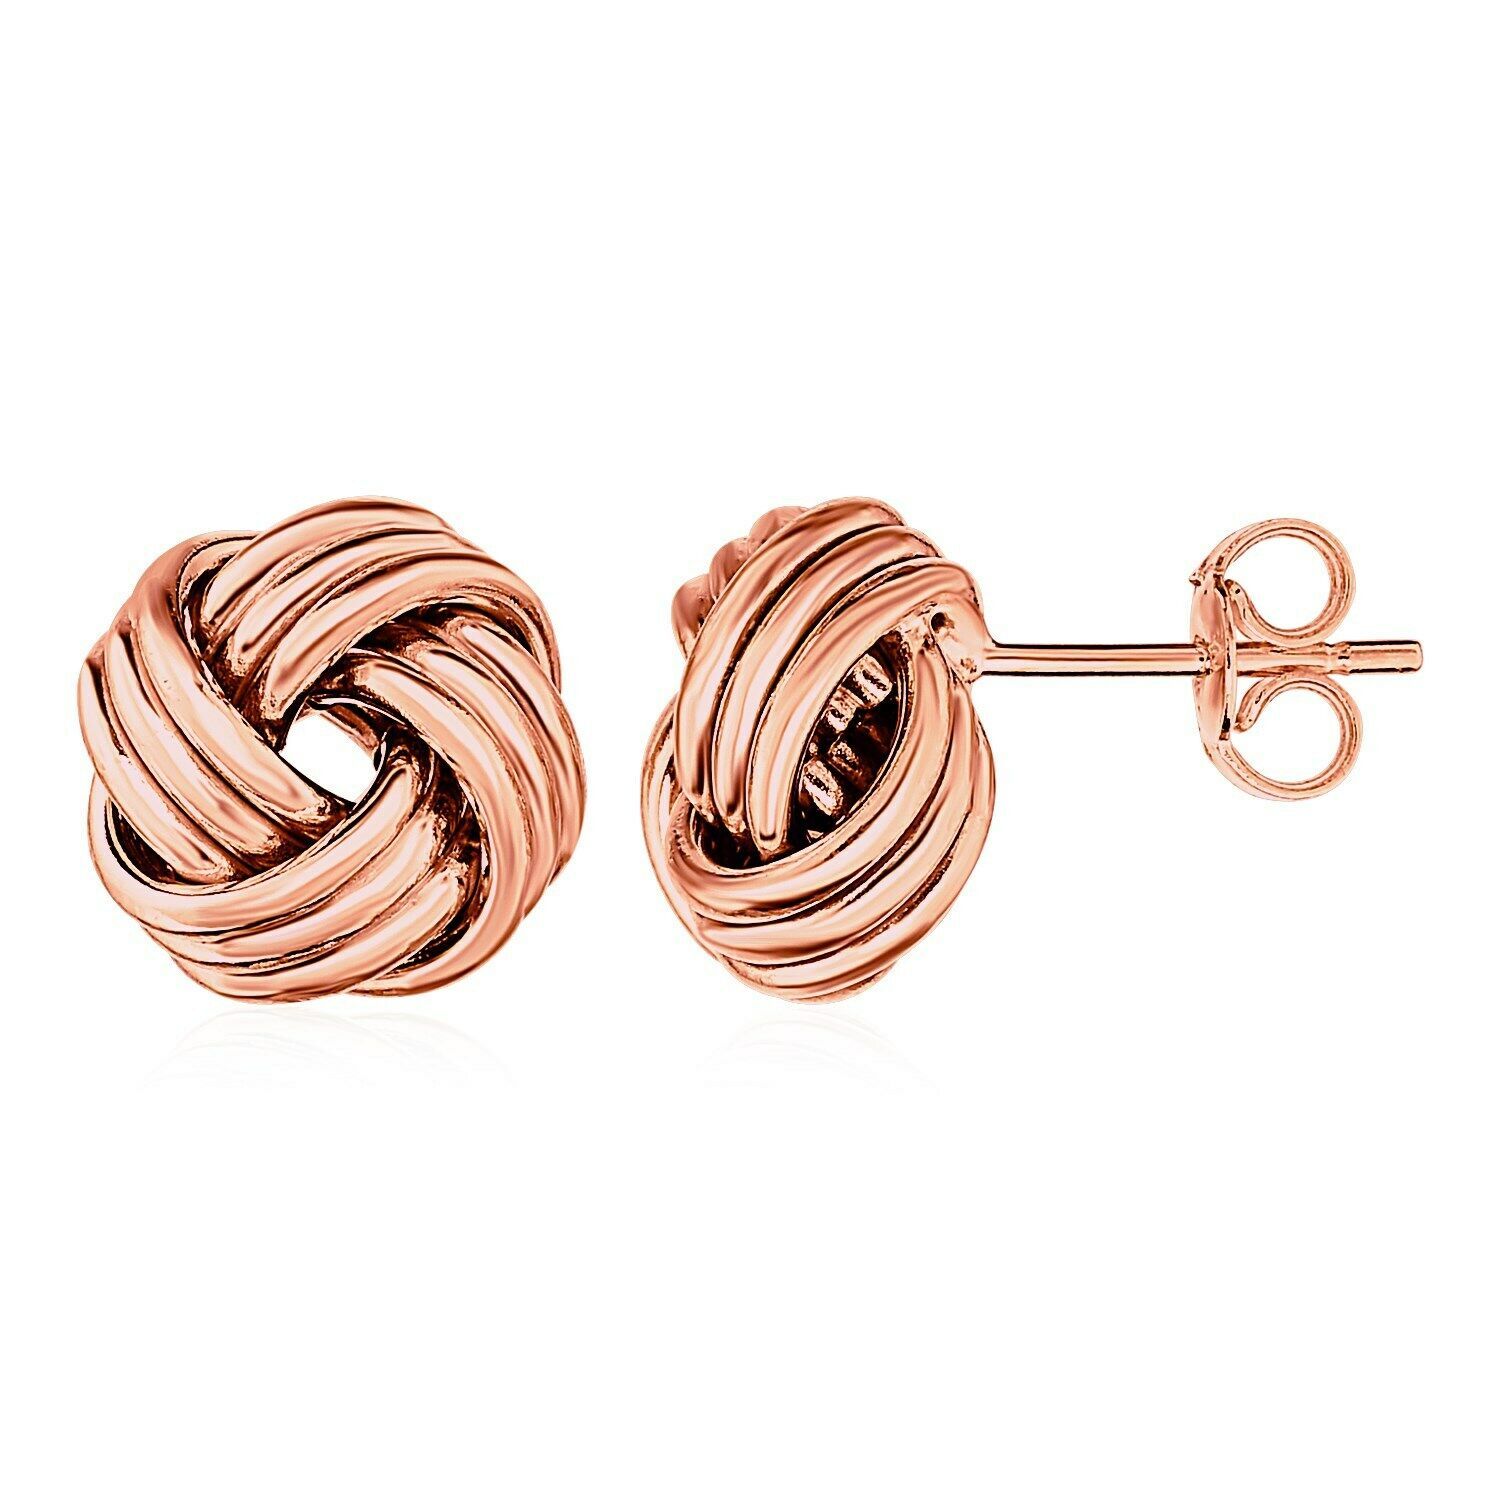 Primary image for 14k Rose Gold Classic Elegant 0.5in Love Knot Post Earrings